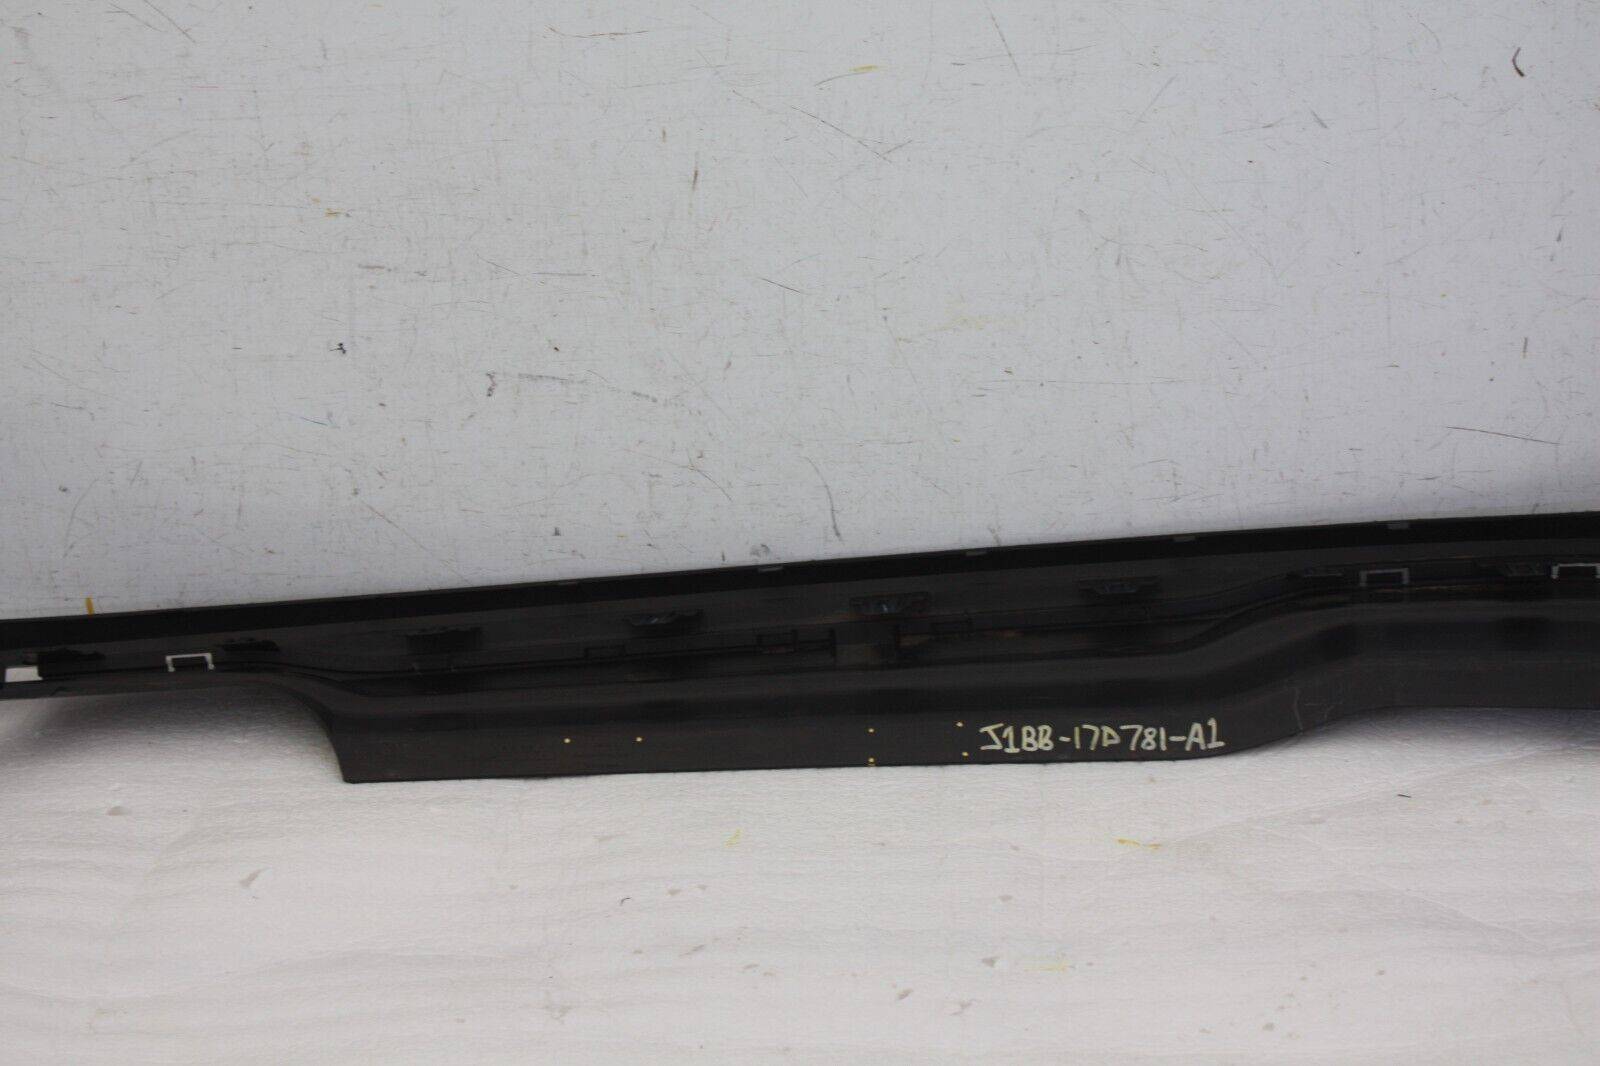 Ford-Fiesta-Active-X-Rear-Bumper-Lower-Section-2018-ON-J1BB-17D781-A1-Genuine-176384480360-16